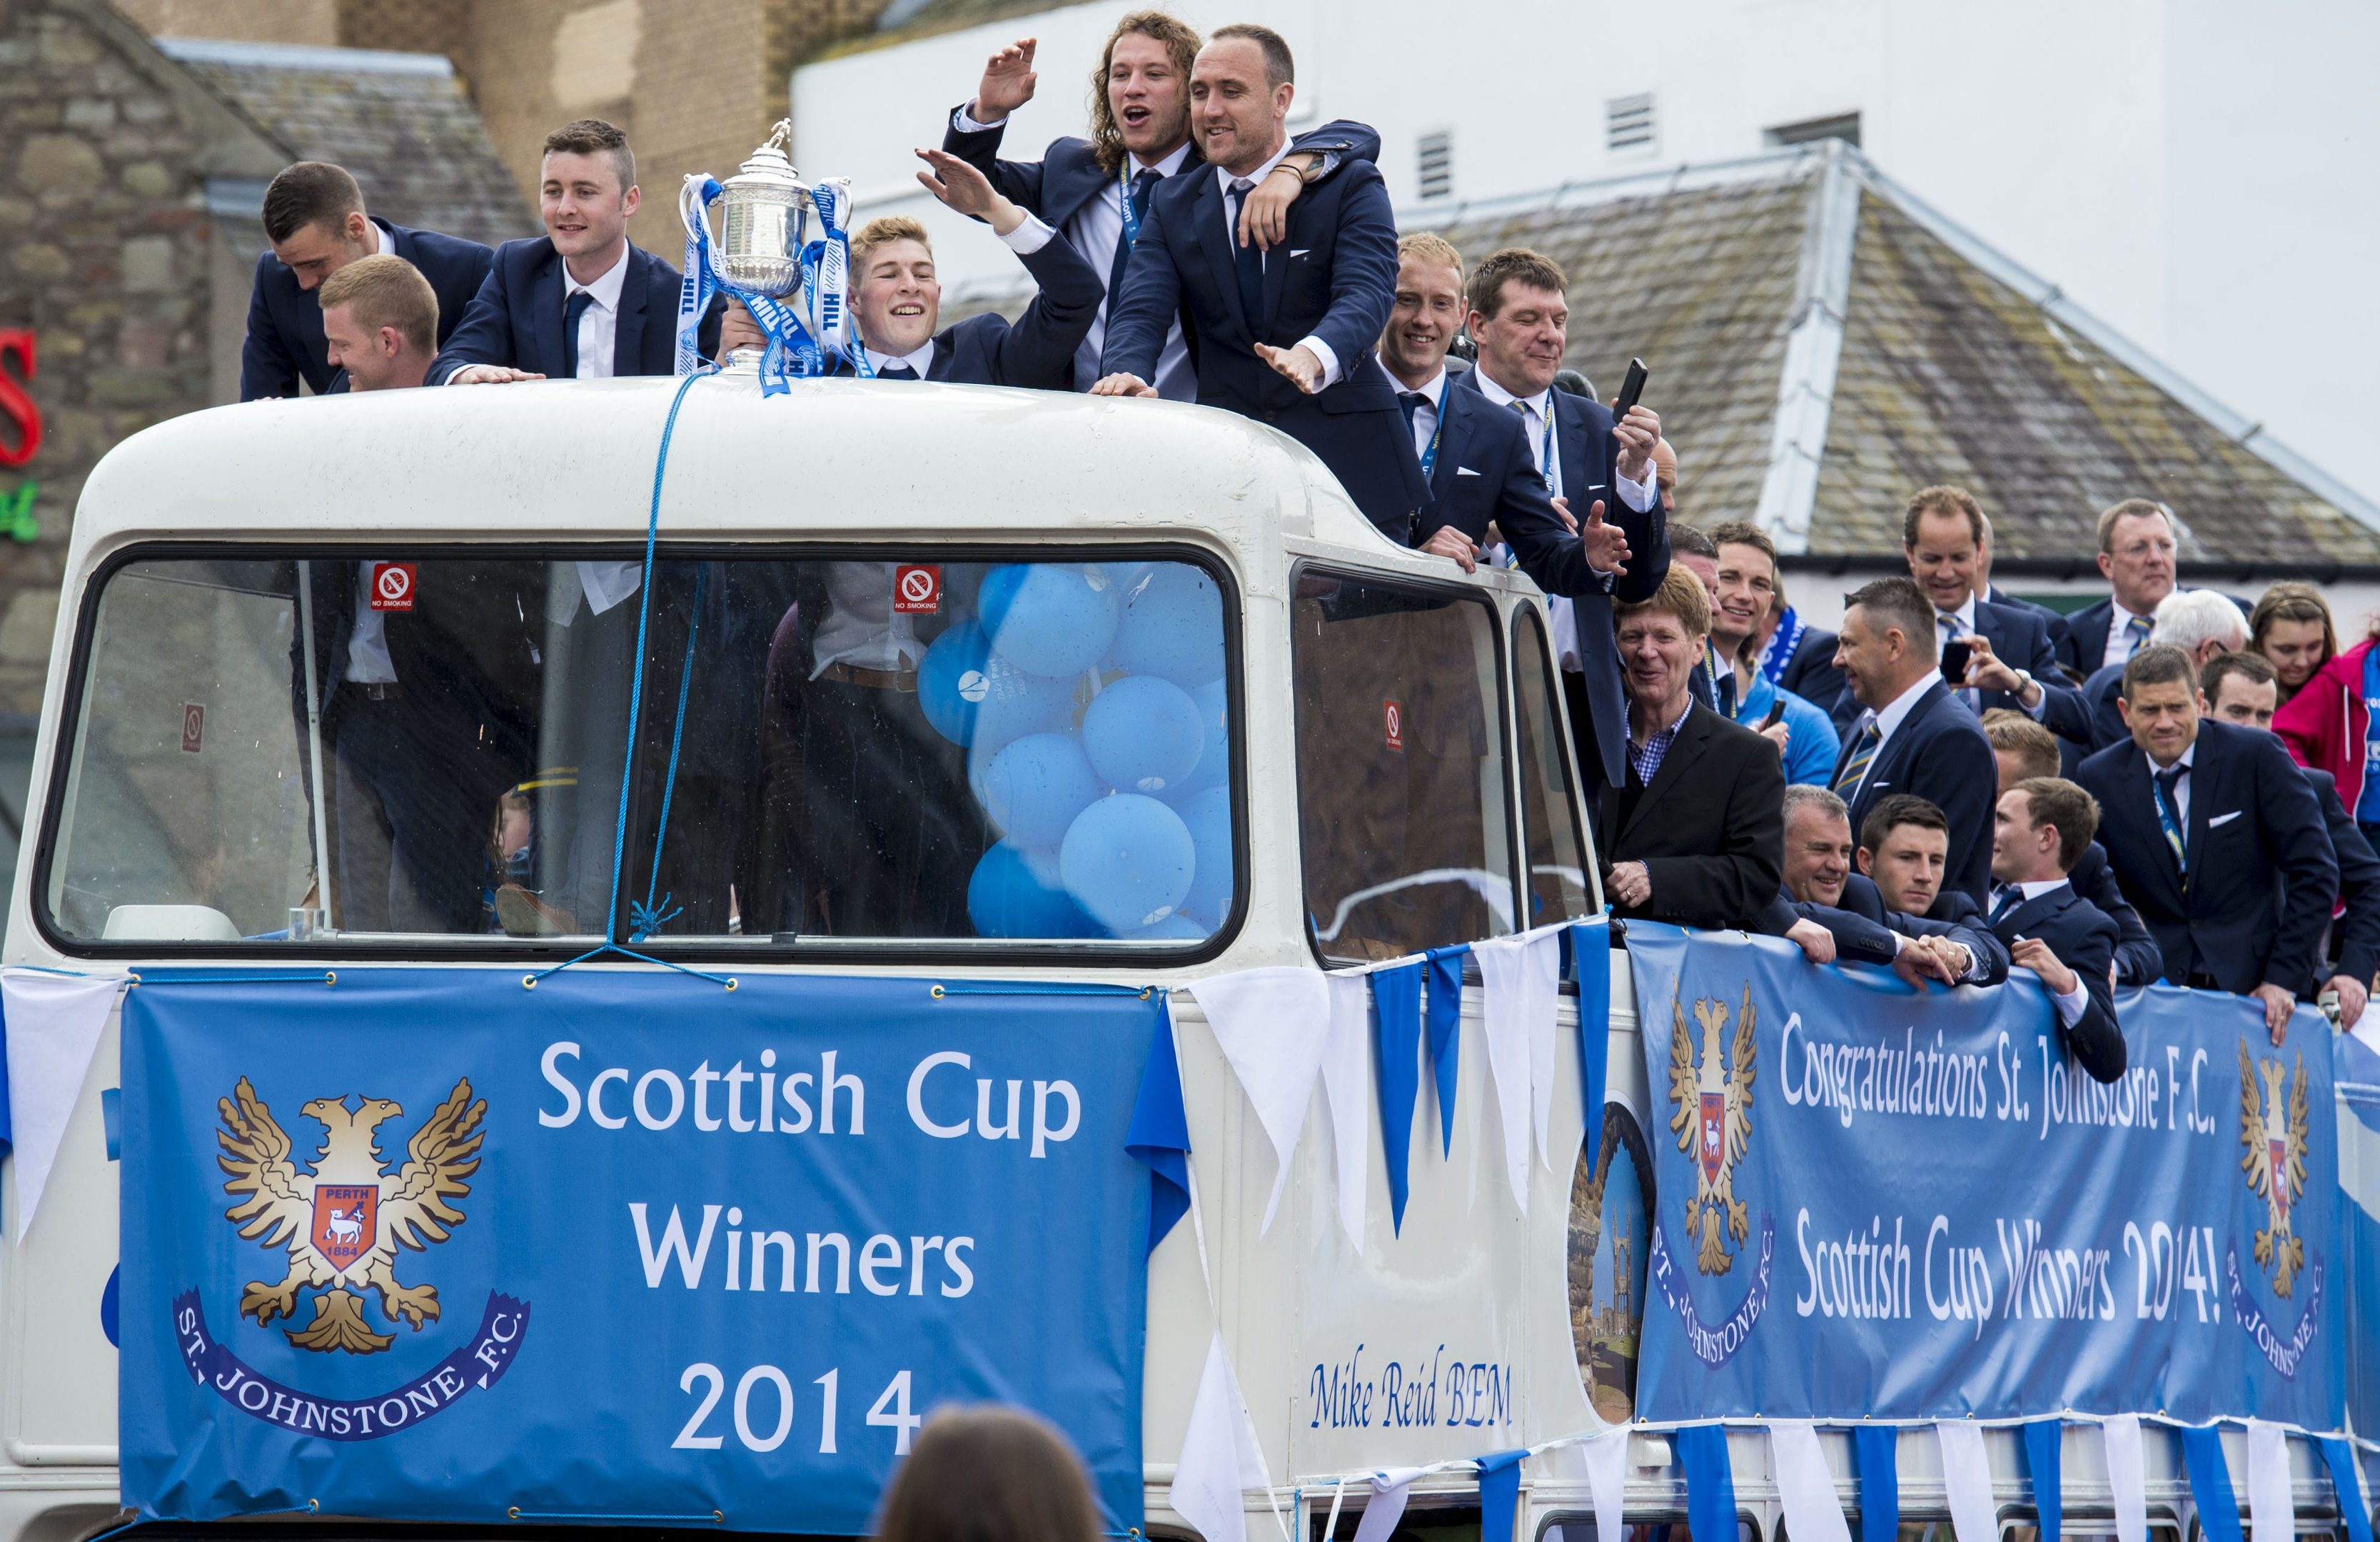 Jim can be spotted on the St Johnstone open-top bus in 2014.